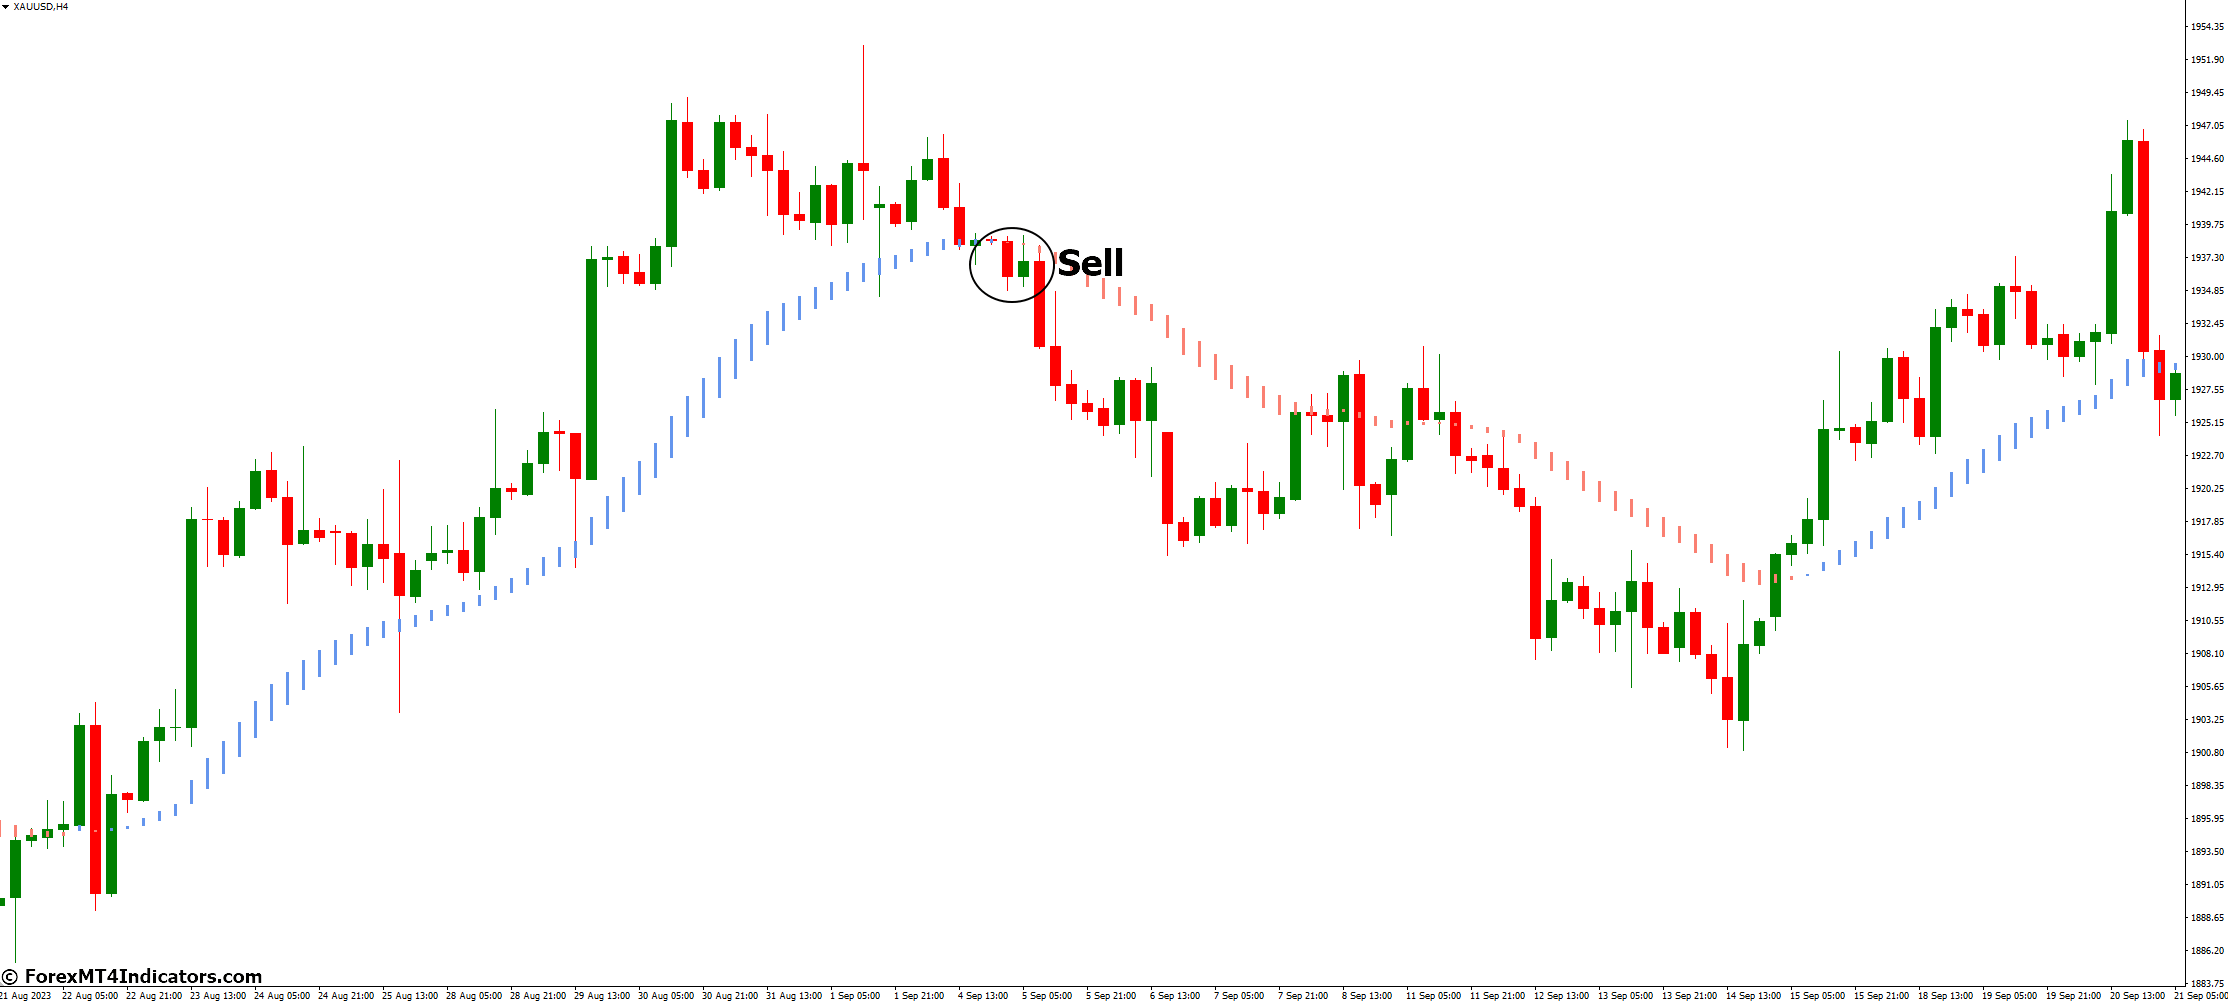 How to Trade with Trend Lord NRP MT4 Indicator - Sell Entry